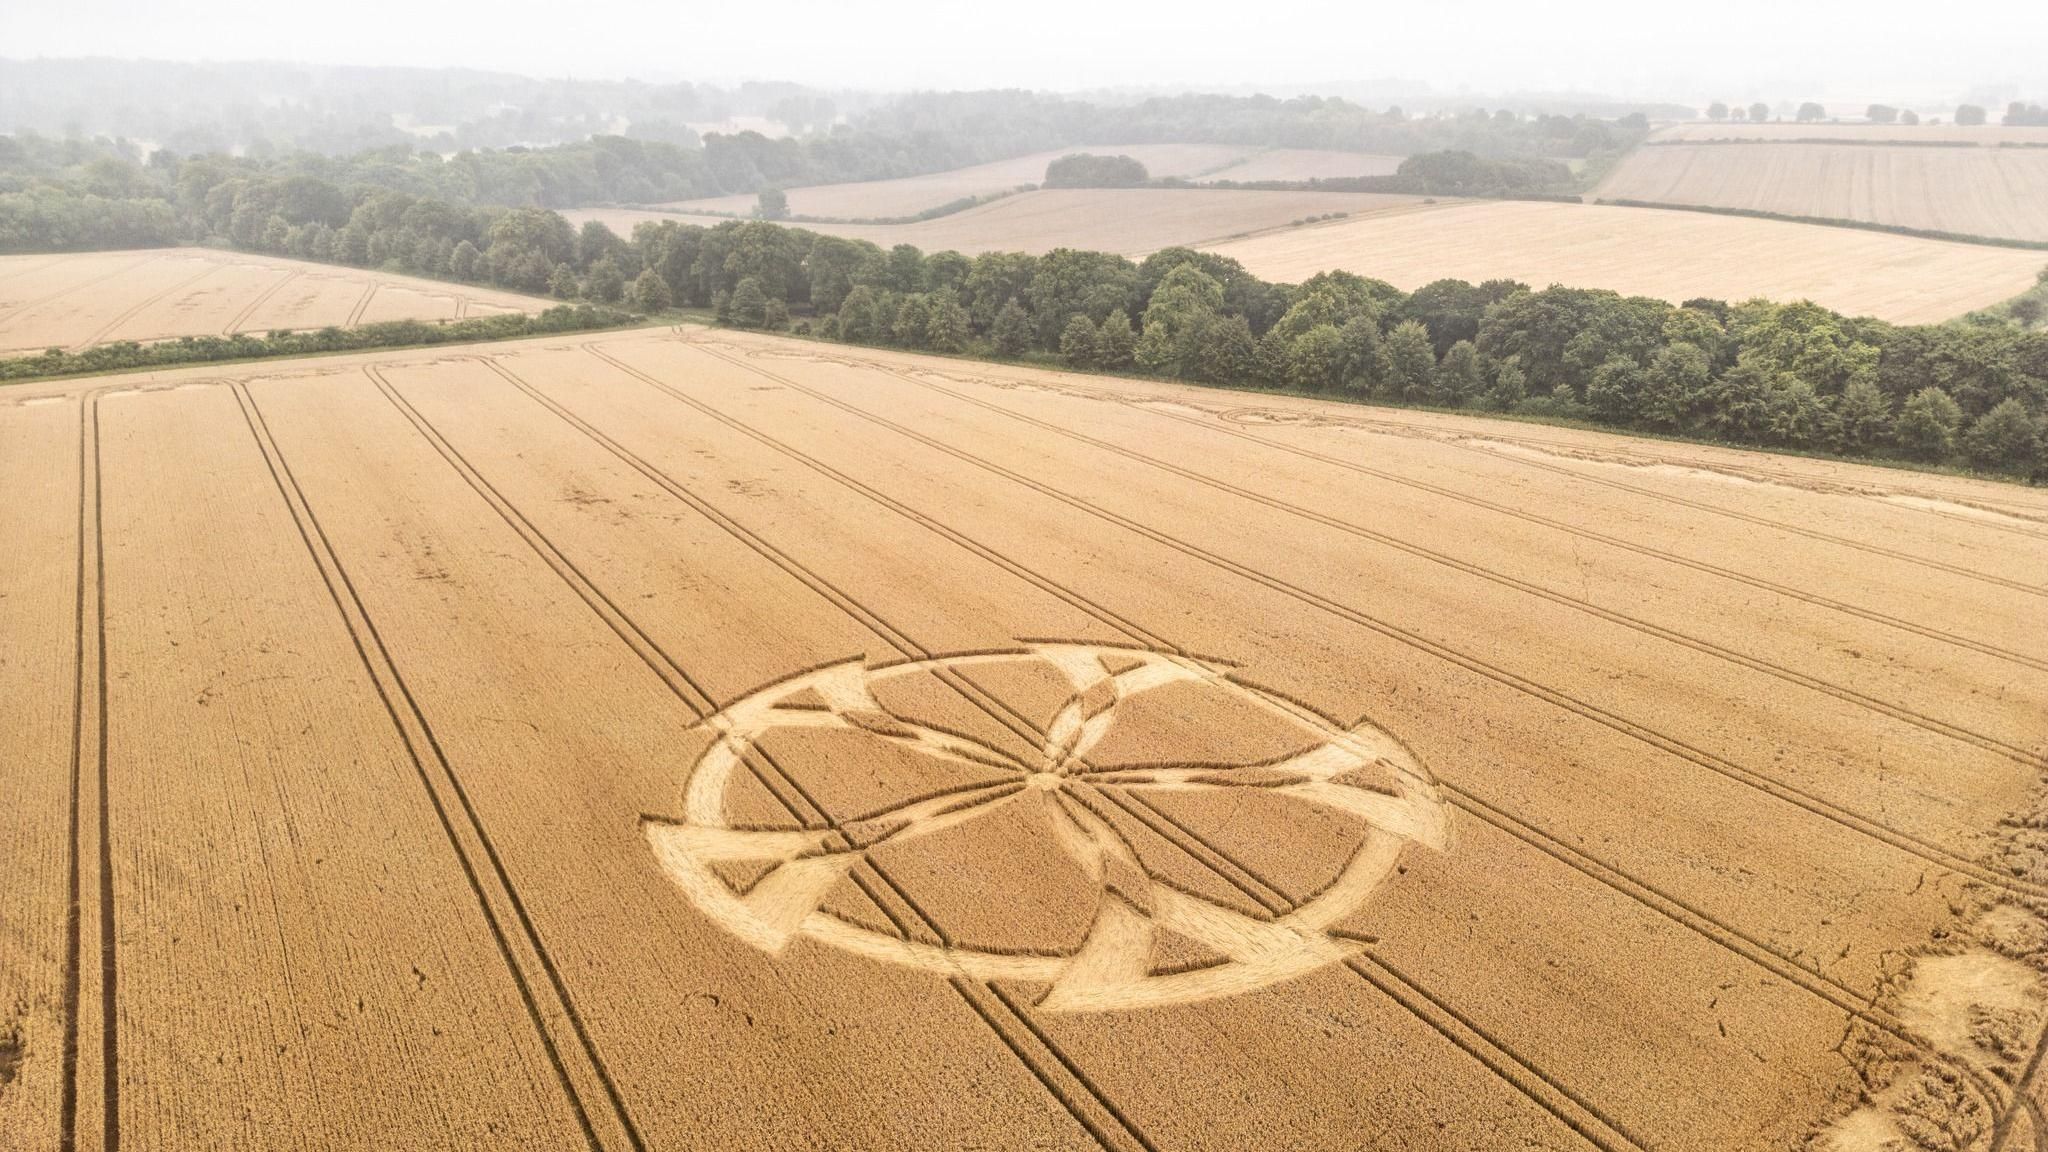 An aerial view of a crop circle resembling a five-spoked wheel with a rural landscape in the background